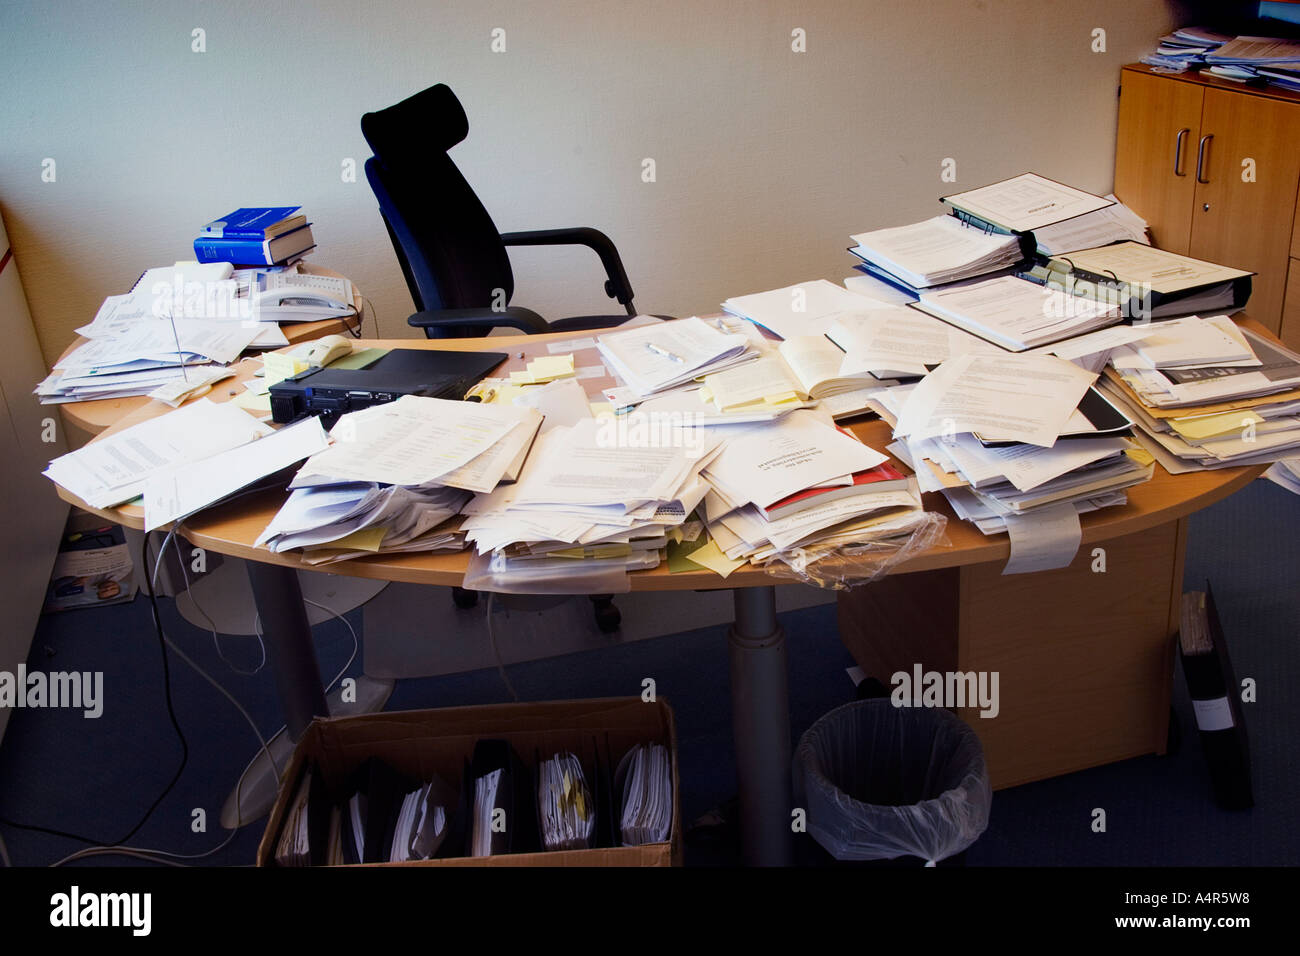 messy desk at office Stock Photo